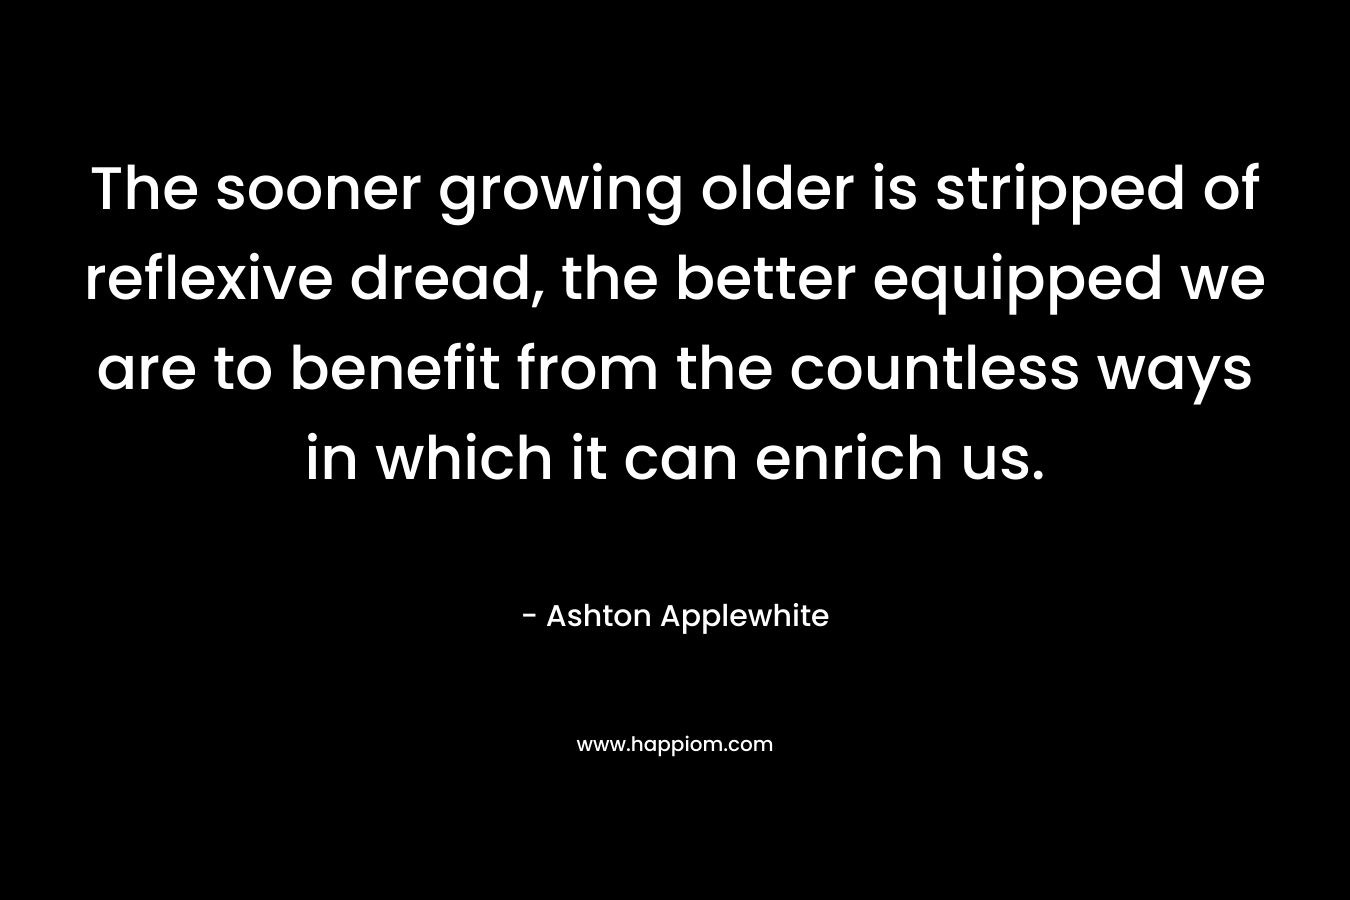 The sooner growing older is stripped of reflexive dread, the better equipped we are to benefit from the countless ways in which it can enrich us.